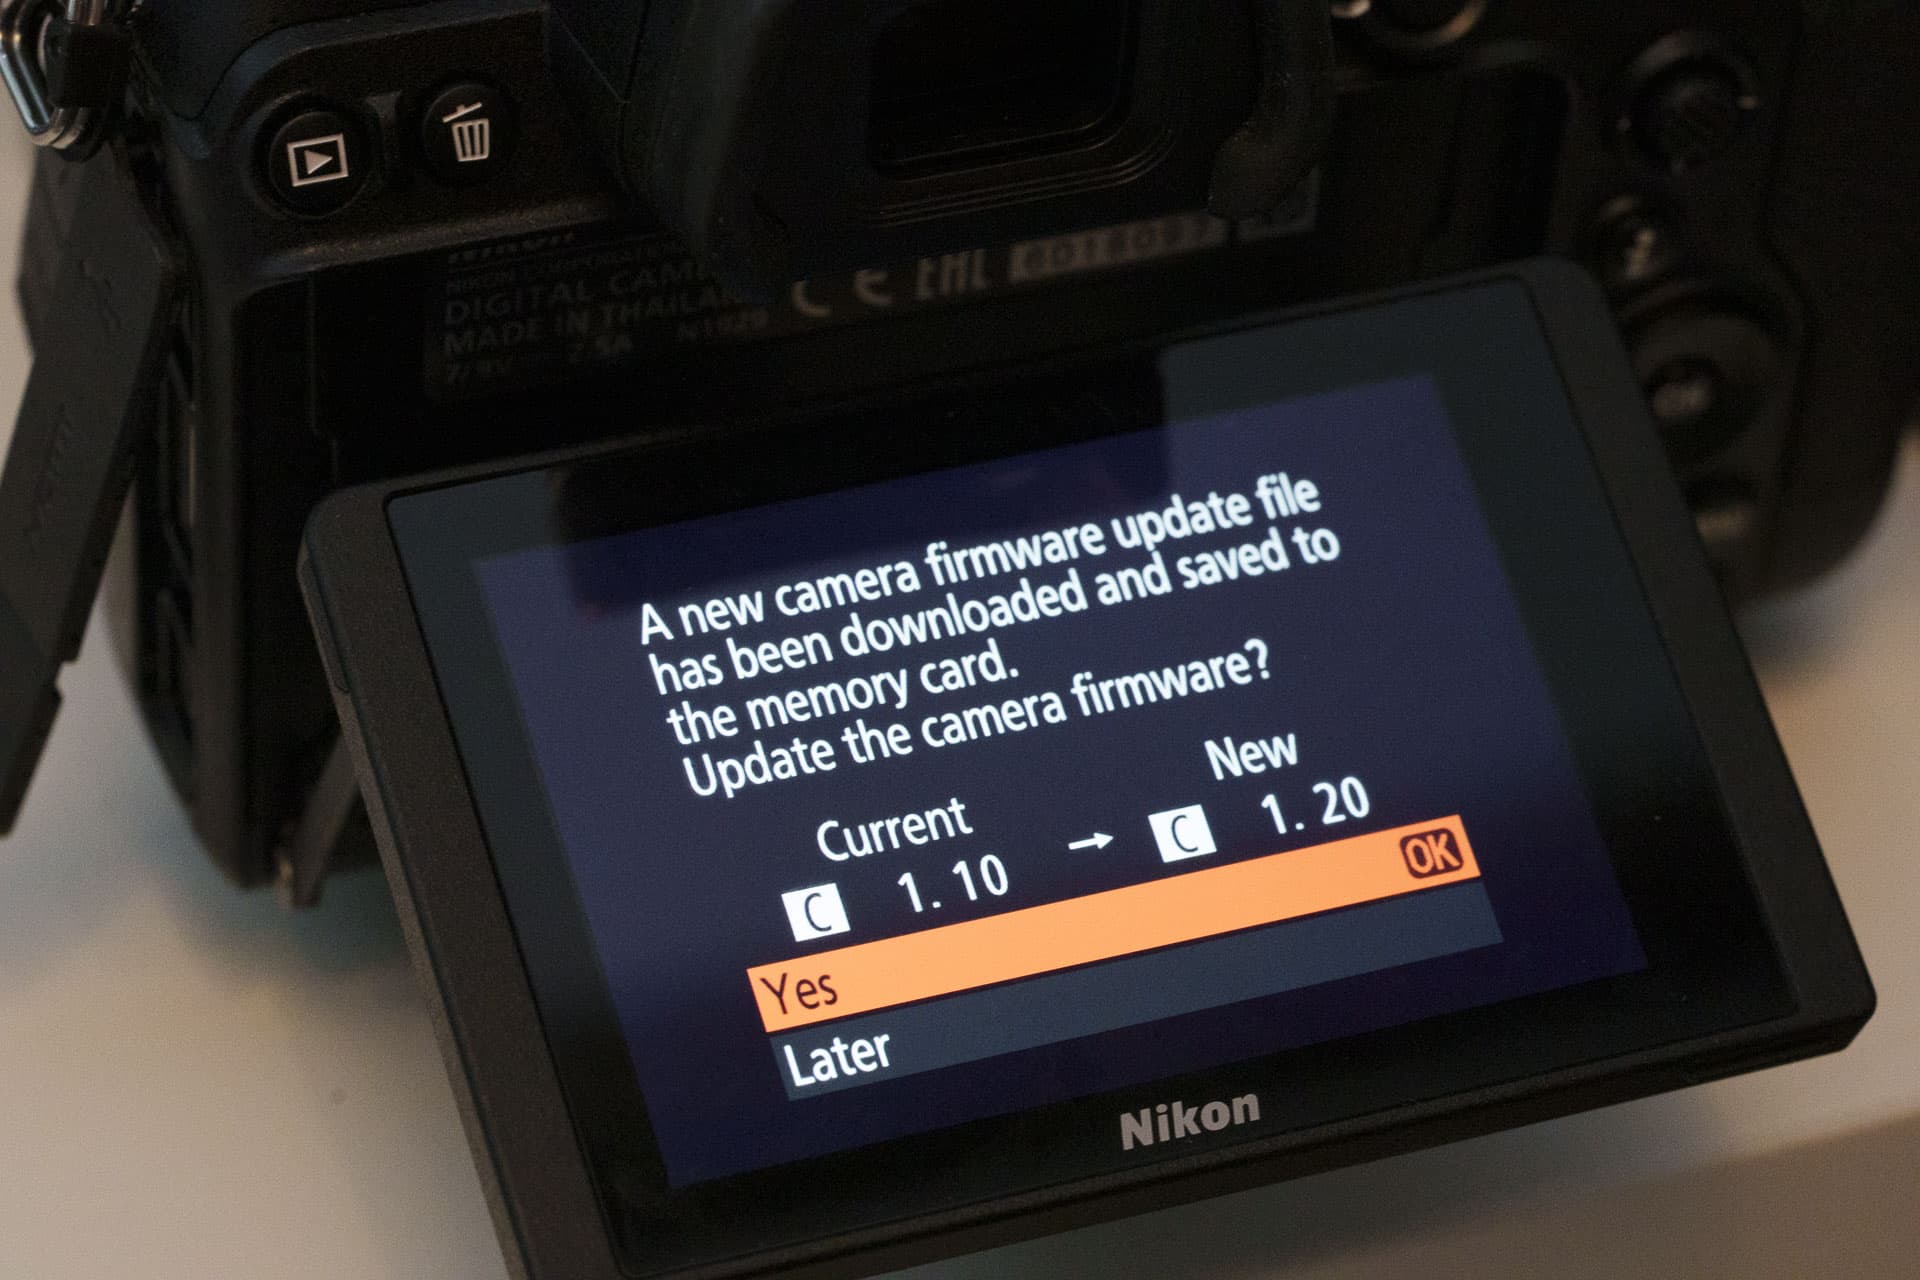 A new camera firmware update file has been downloaded and saved to the memory card. 